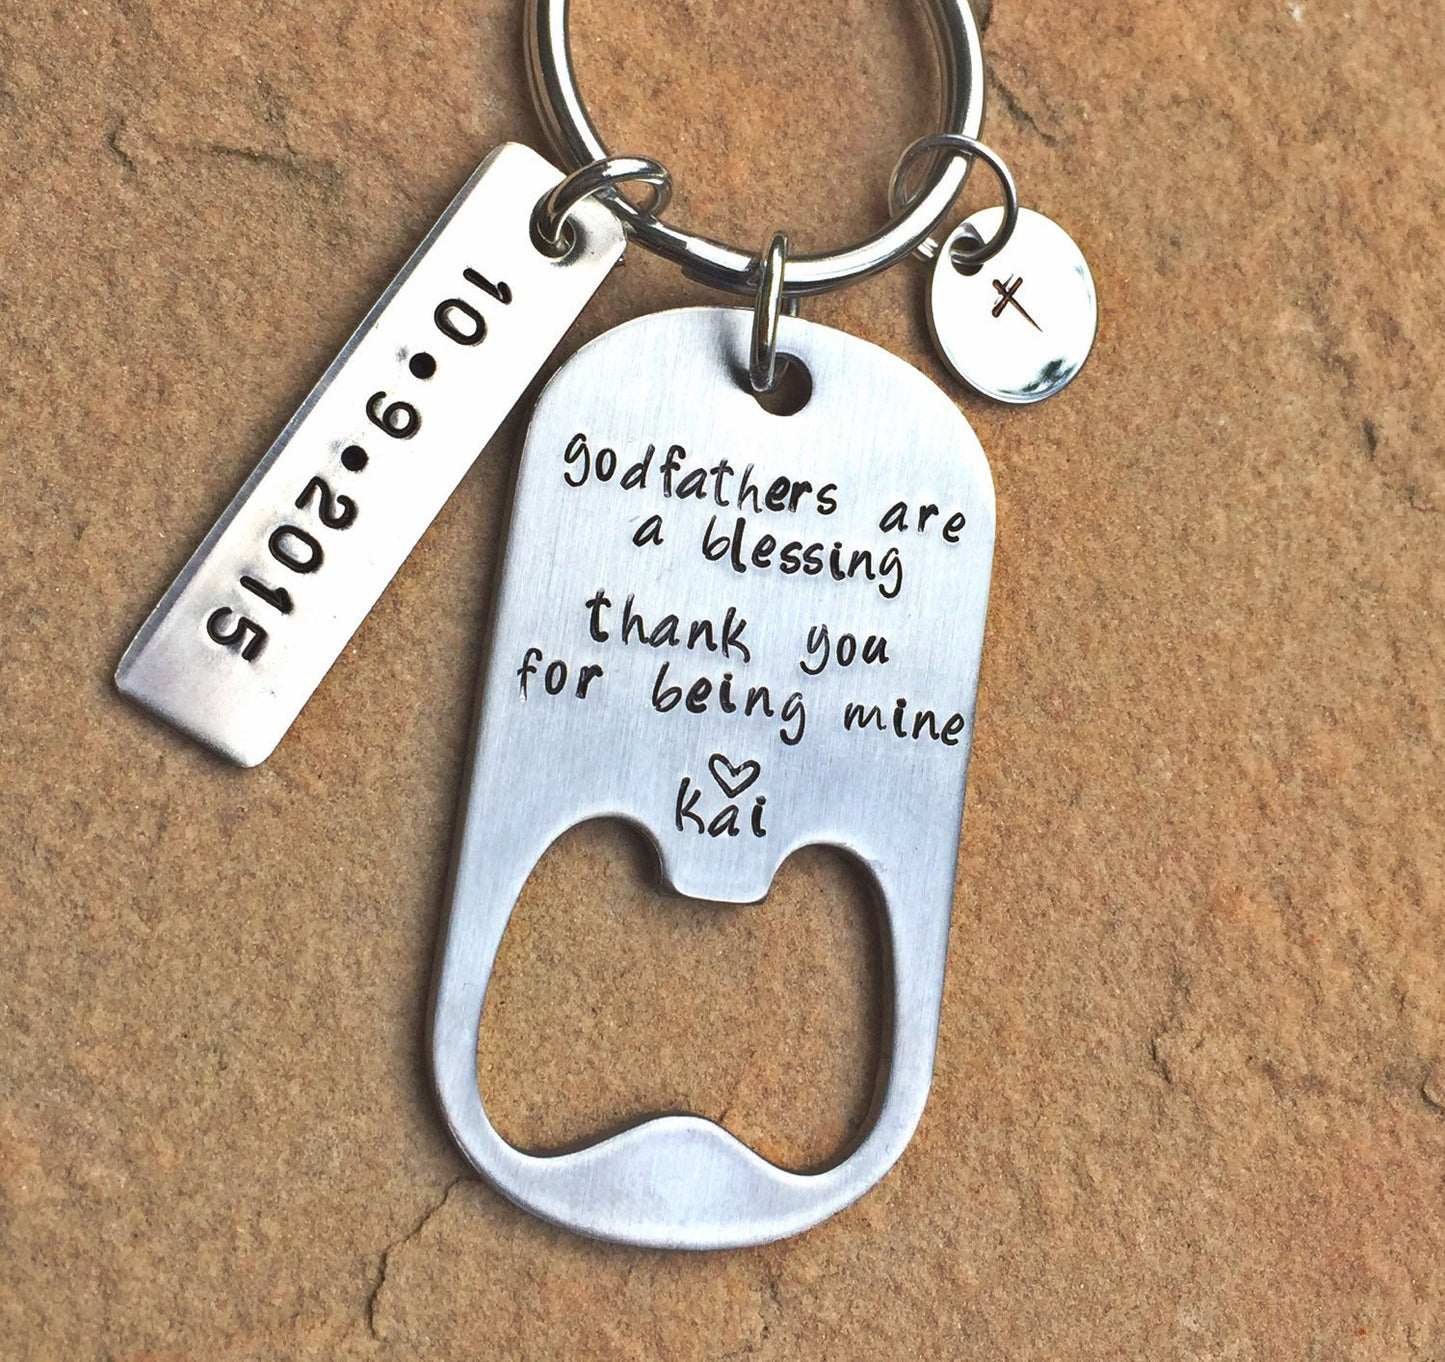 Best Daddy Keychain - Natashaaloha, jewelry, bracelets, necklace, keychains, fishing lures, gifts for men, charms, personalized, 